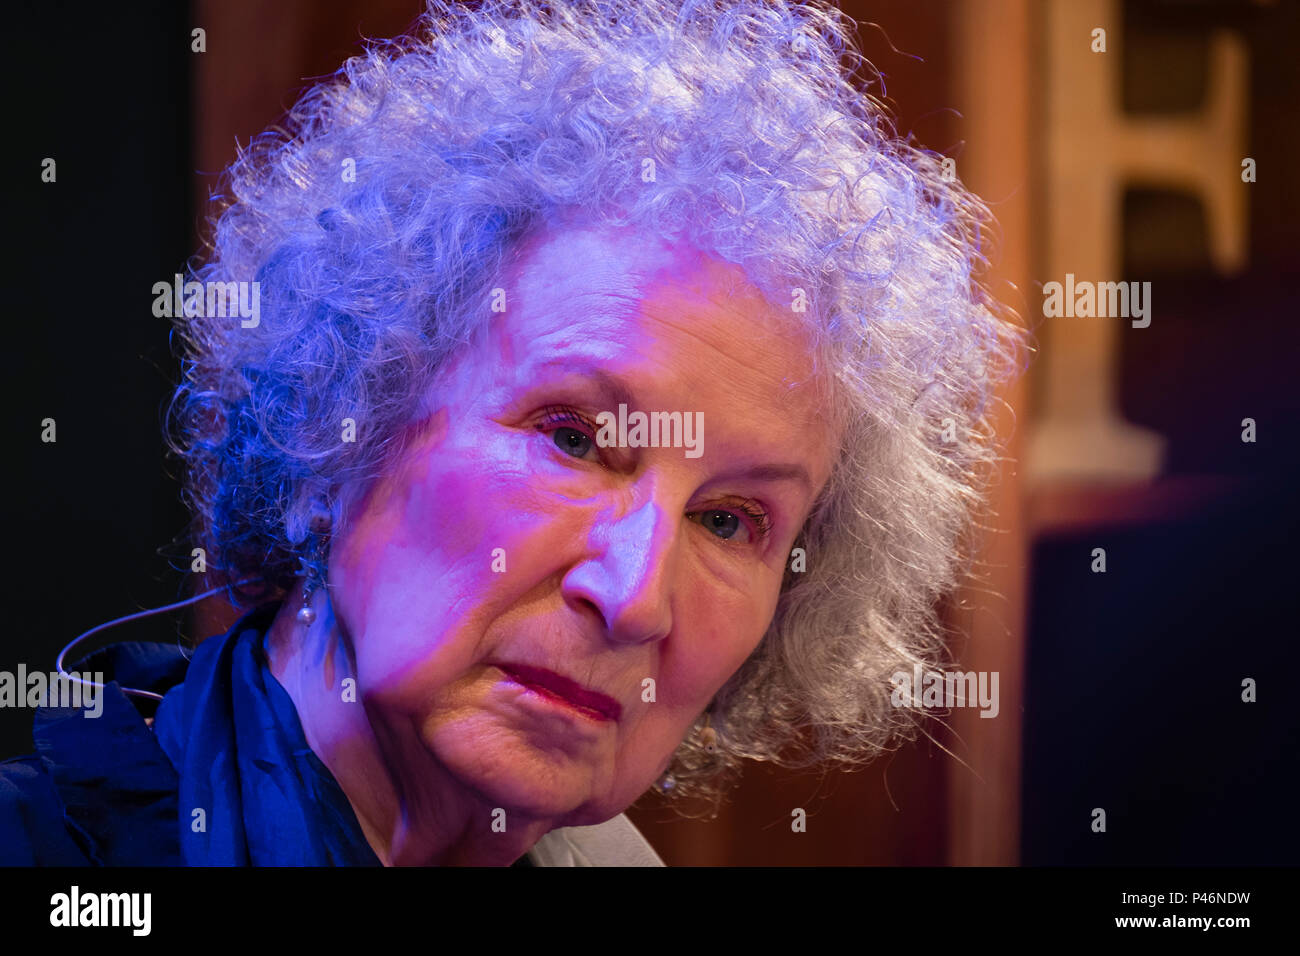 MARGARET ATWOOD, Canadian novelist, writer, commentator. Author of the dystopian classic 'The Handmad's Tale'   Appearing  at the 2018 Hay Festival of Literature and the Arts.  The annual festival  in the small town of Hay on Wye on the Welsh borders , attracts  writers and thinkers from across the globe for 10 days of celebrations of the best of the written word, political though  and literary debate Stock Photo